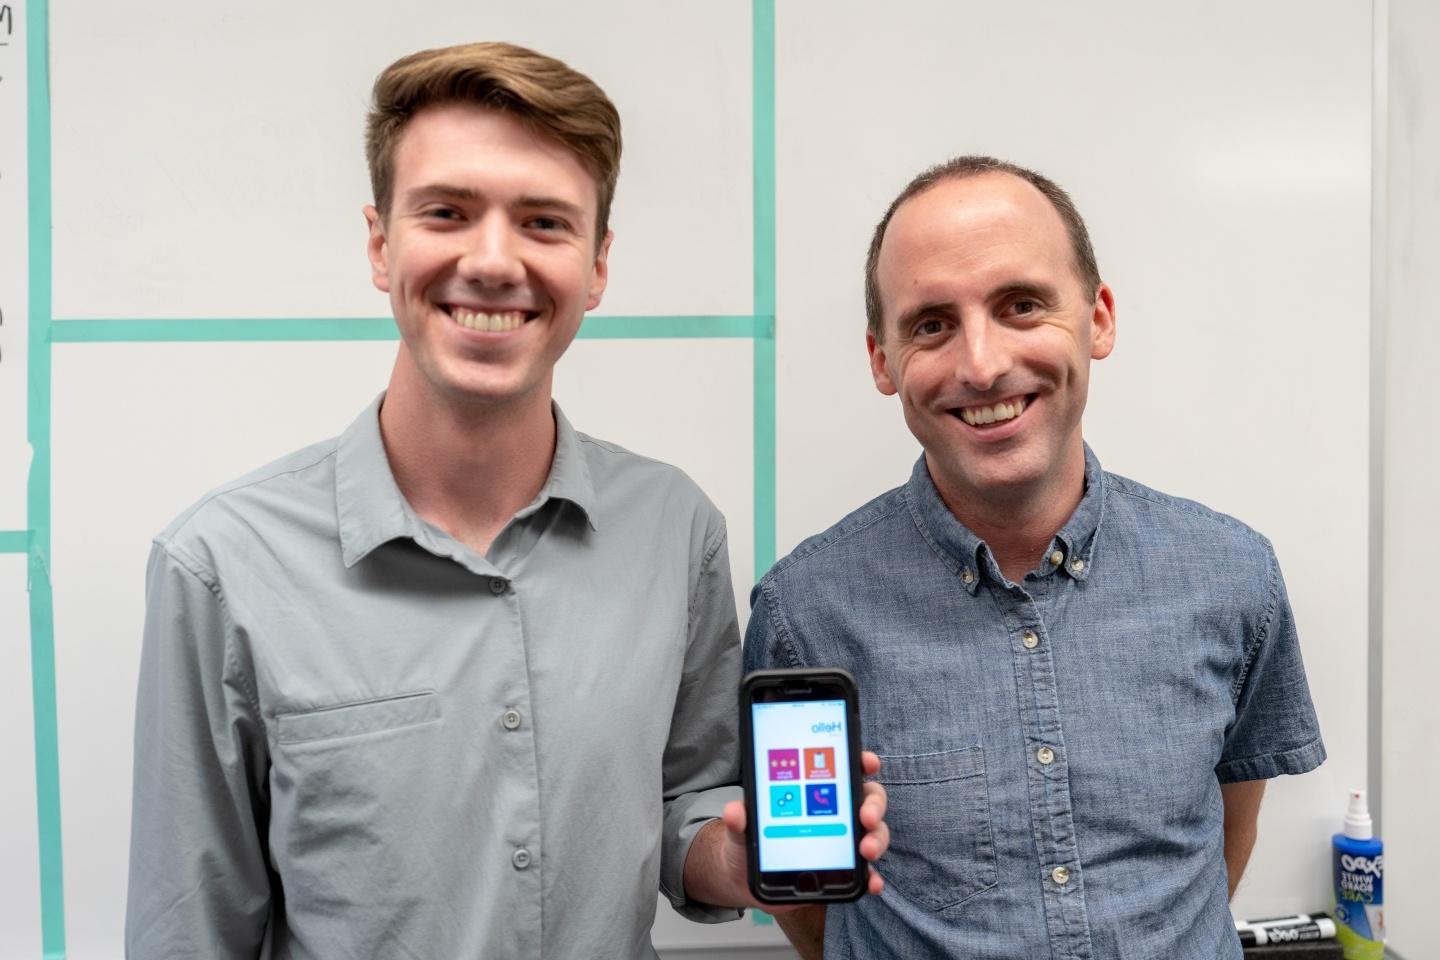 two men smiling and showing an iPhone screen